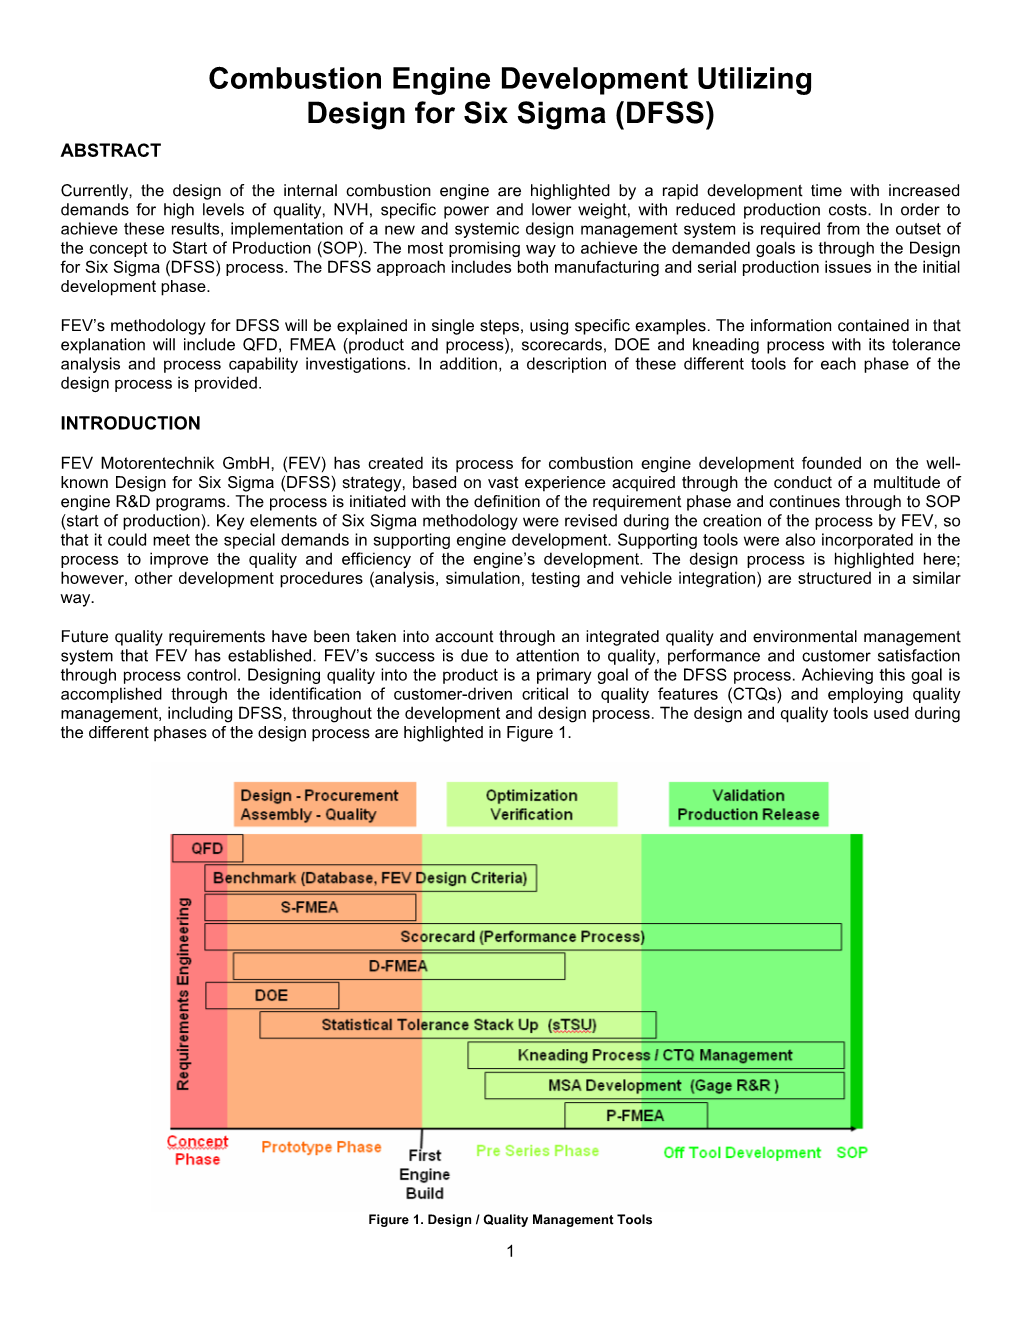 Combustion Engine Development Utilizing Design for Six Sigma (DFSS) ABSTRACT